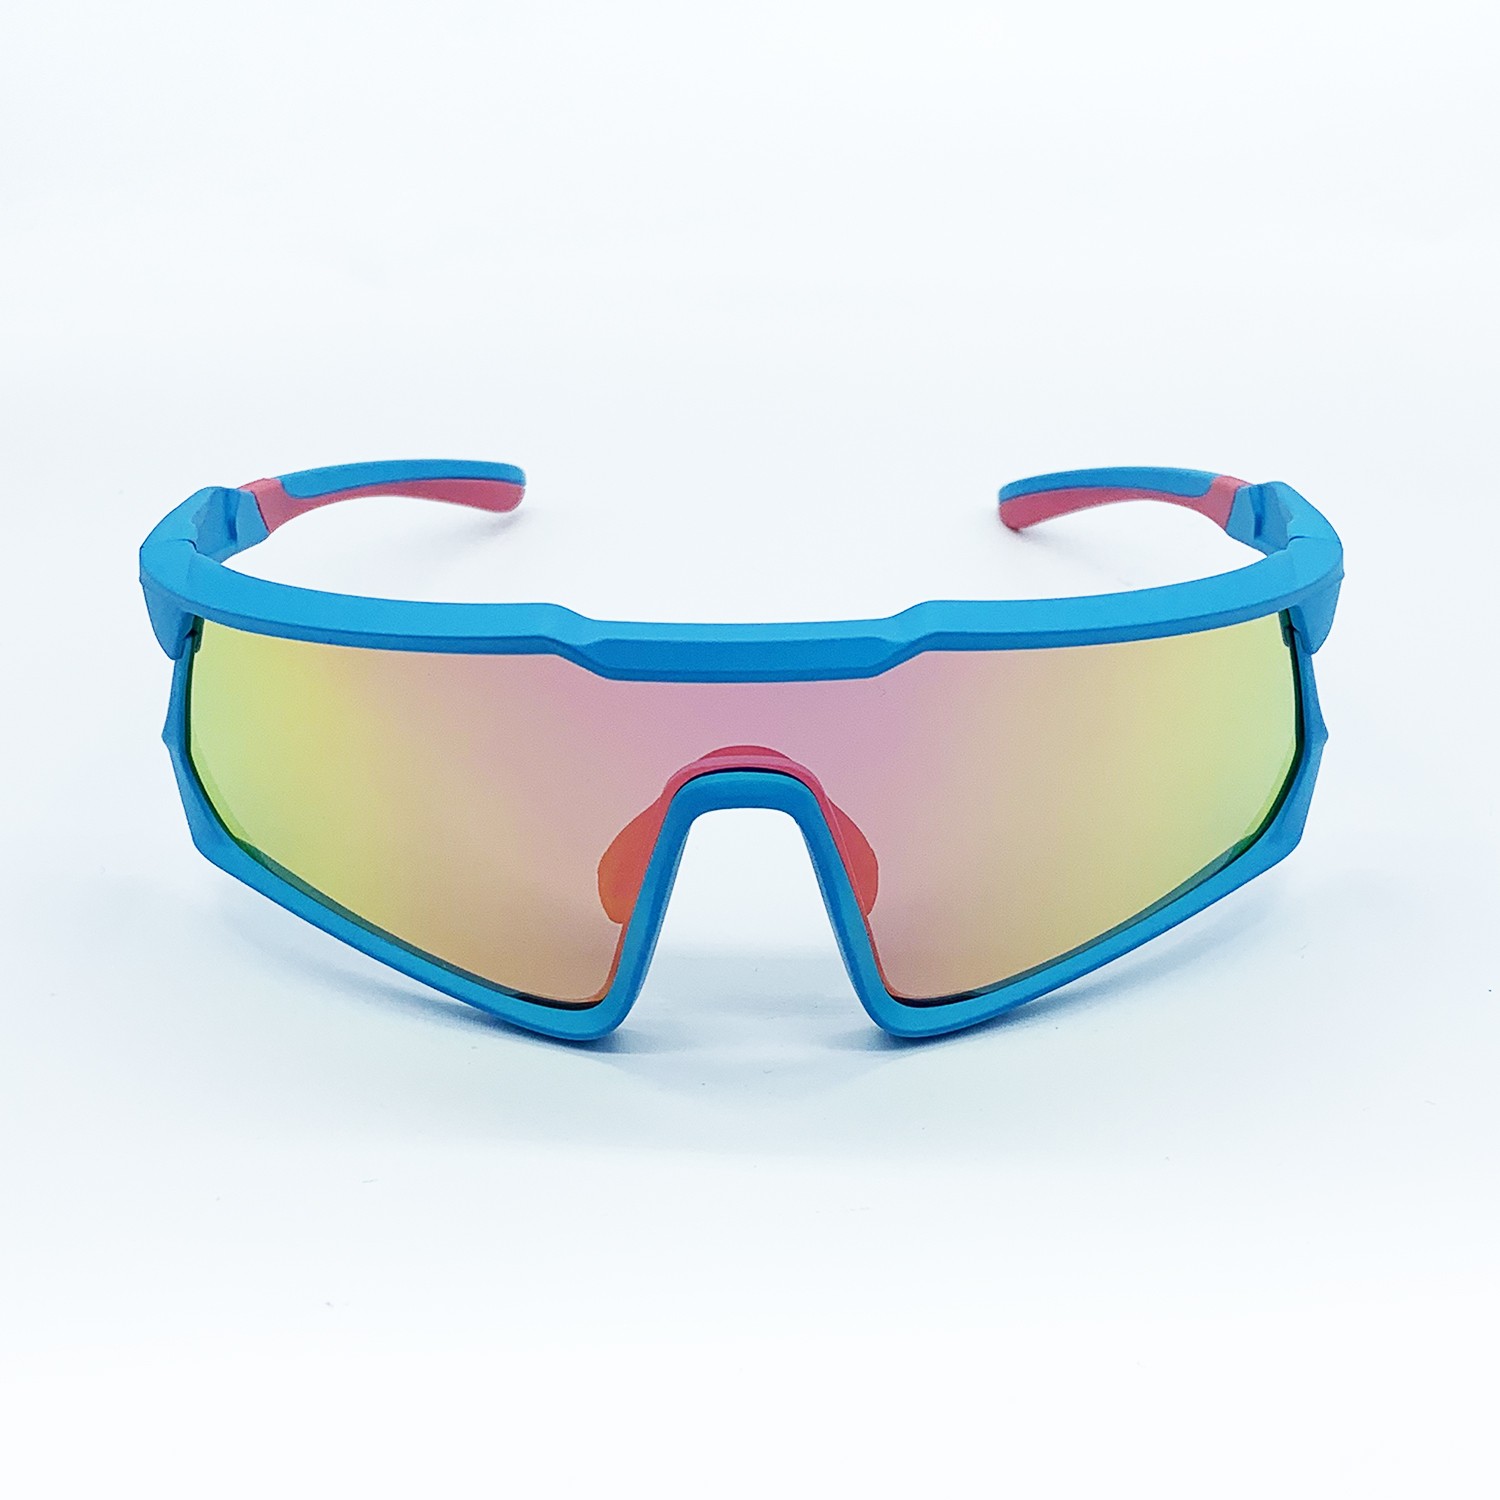 BLUE/PINK DUNGEON MASTER SUNGLASSES